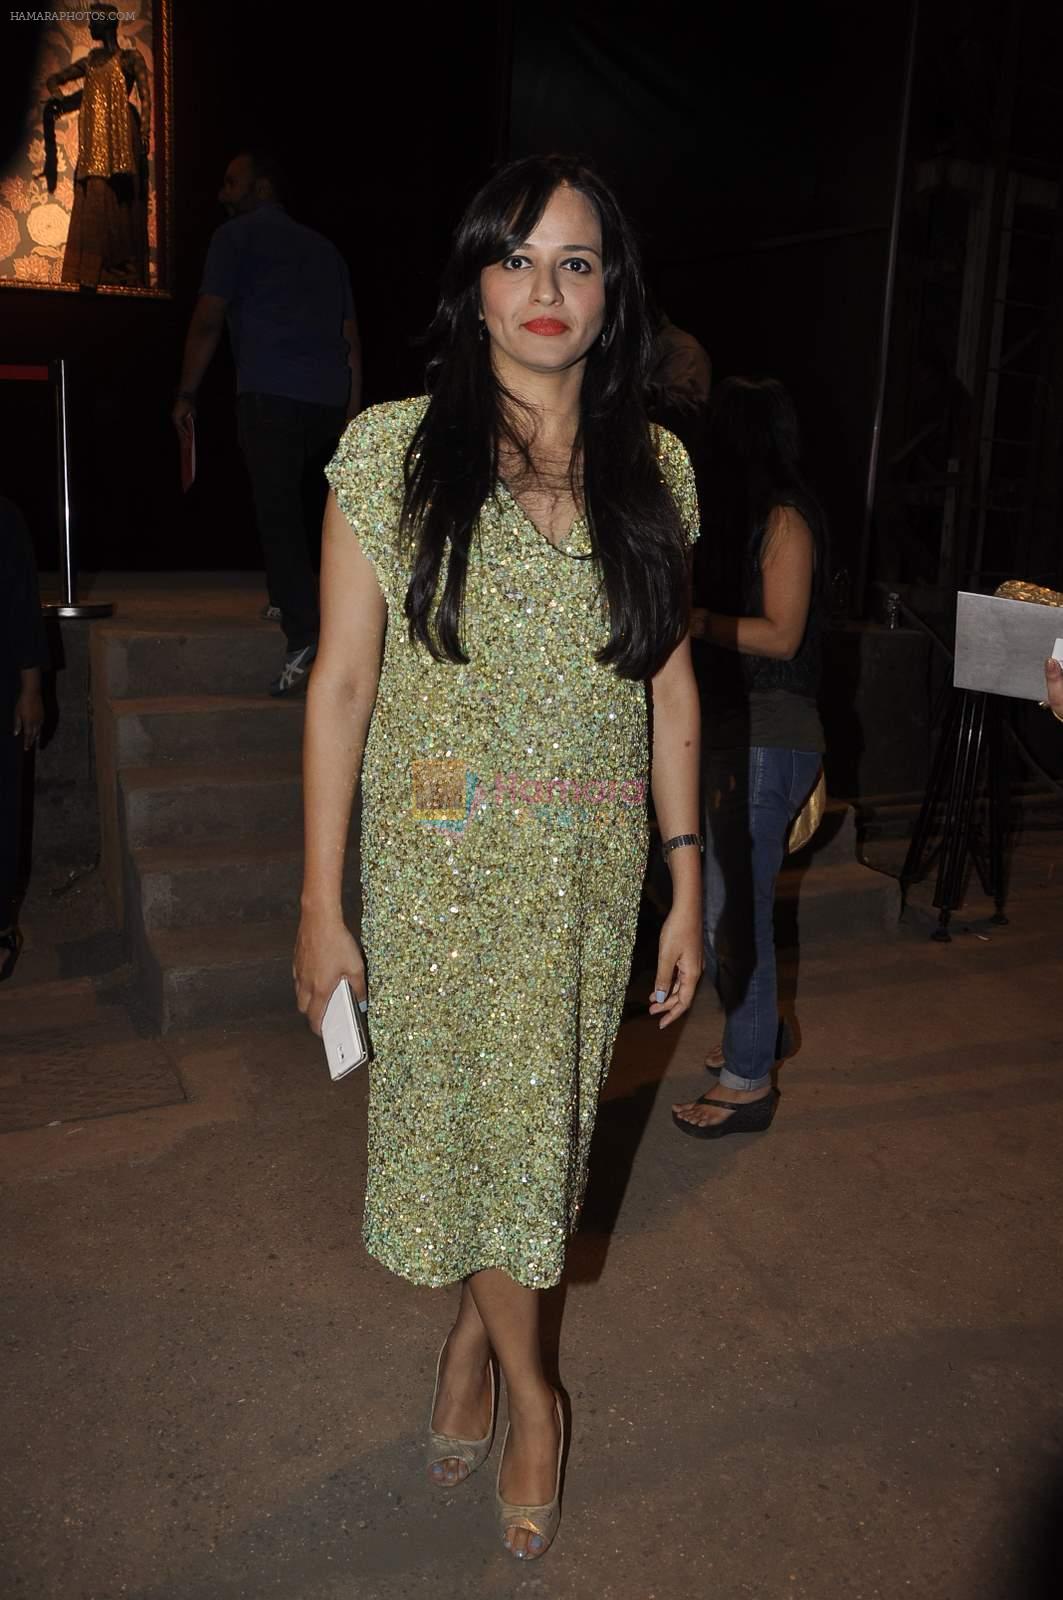 at Sabyasachi show in Byculla on 17th March 2015